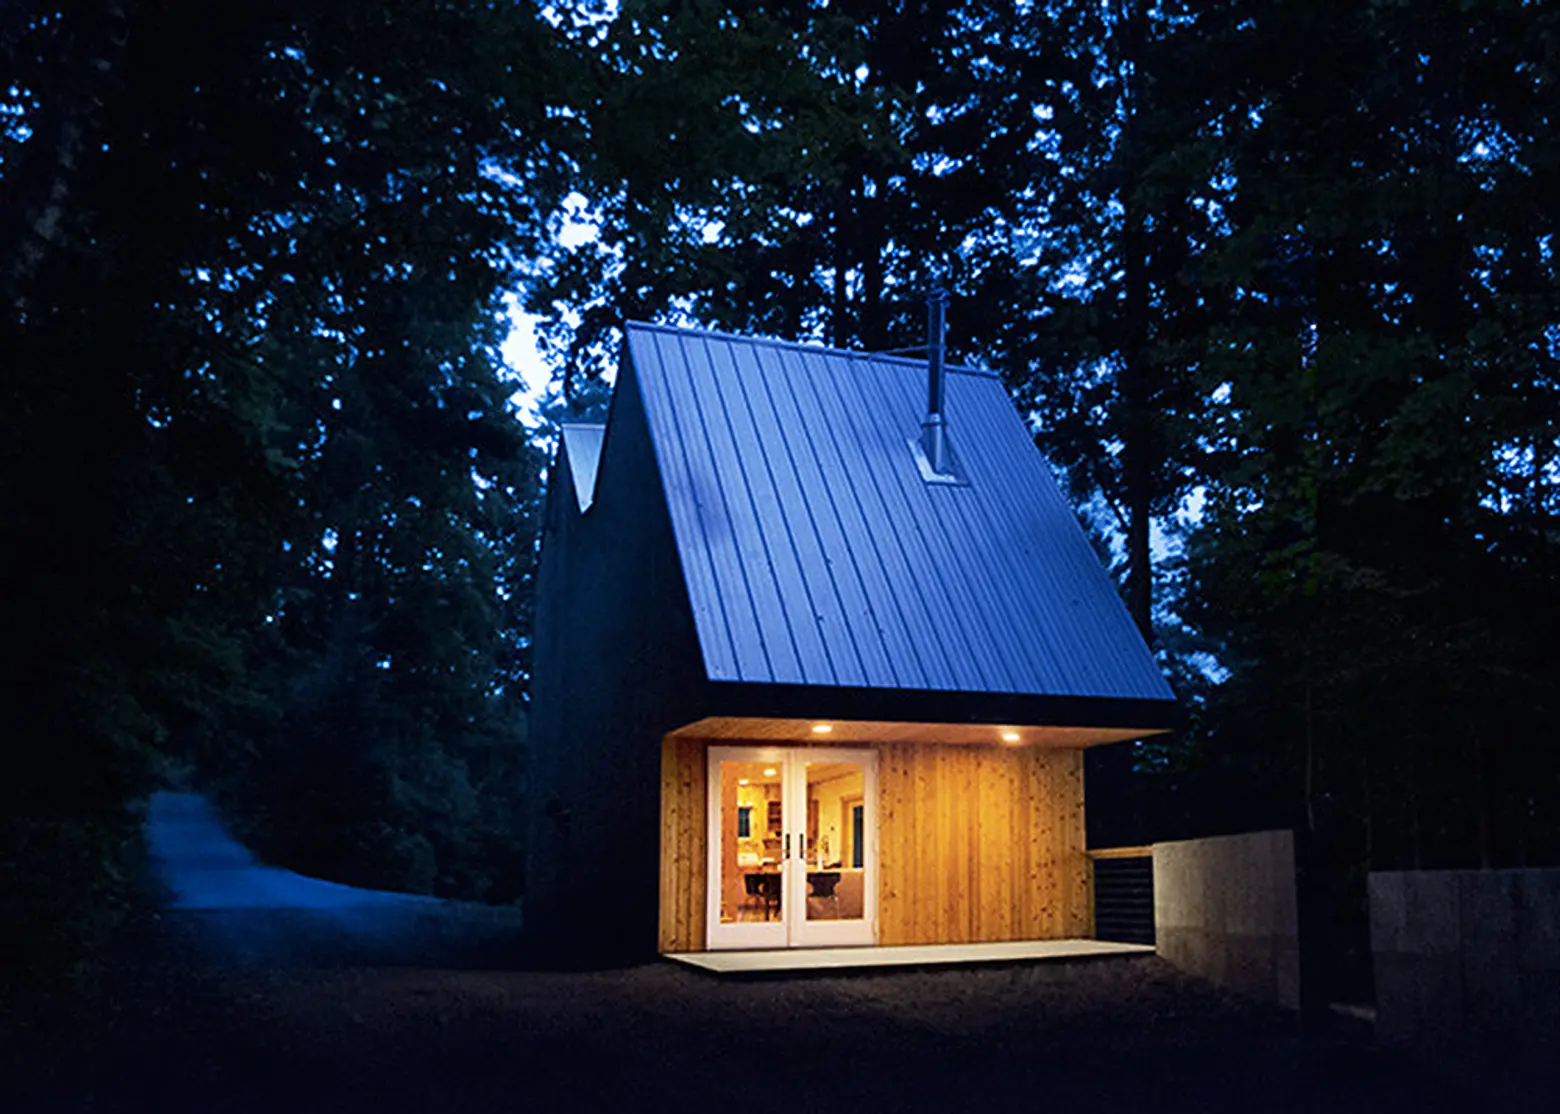 Jeffrey S. Poss’ Double-Gable Woodland Dwelling Shelters Guests and a Sculpture Studio Inside